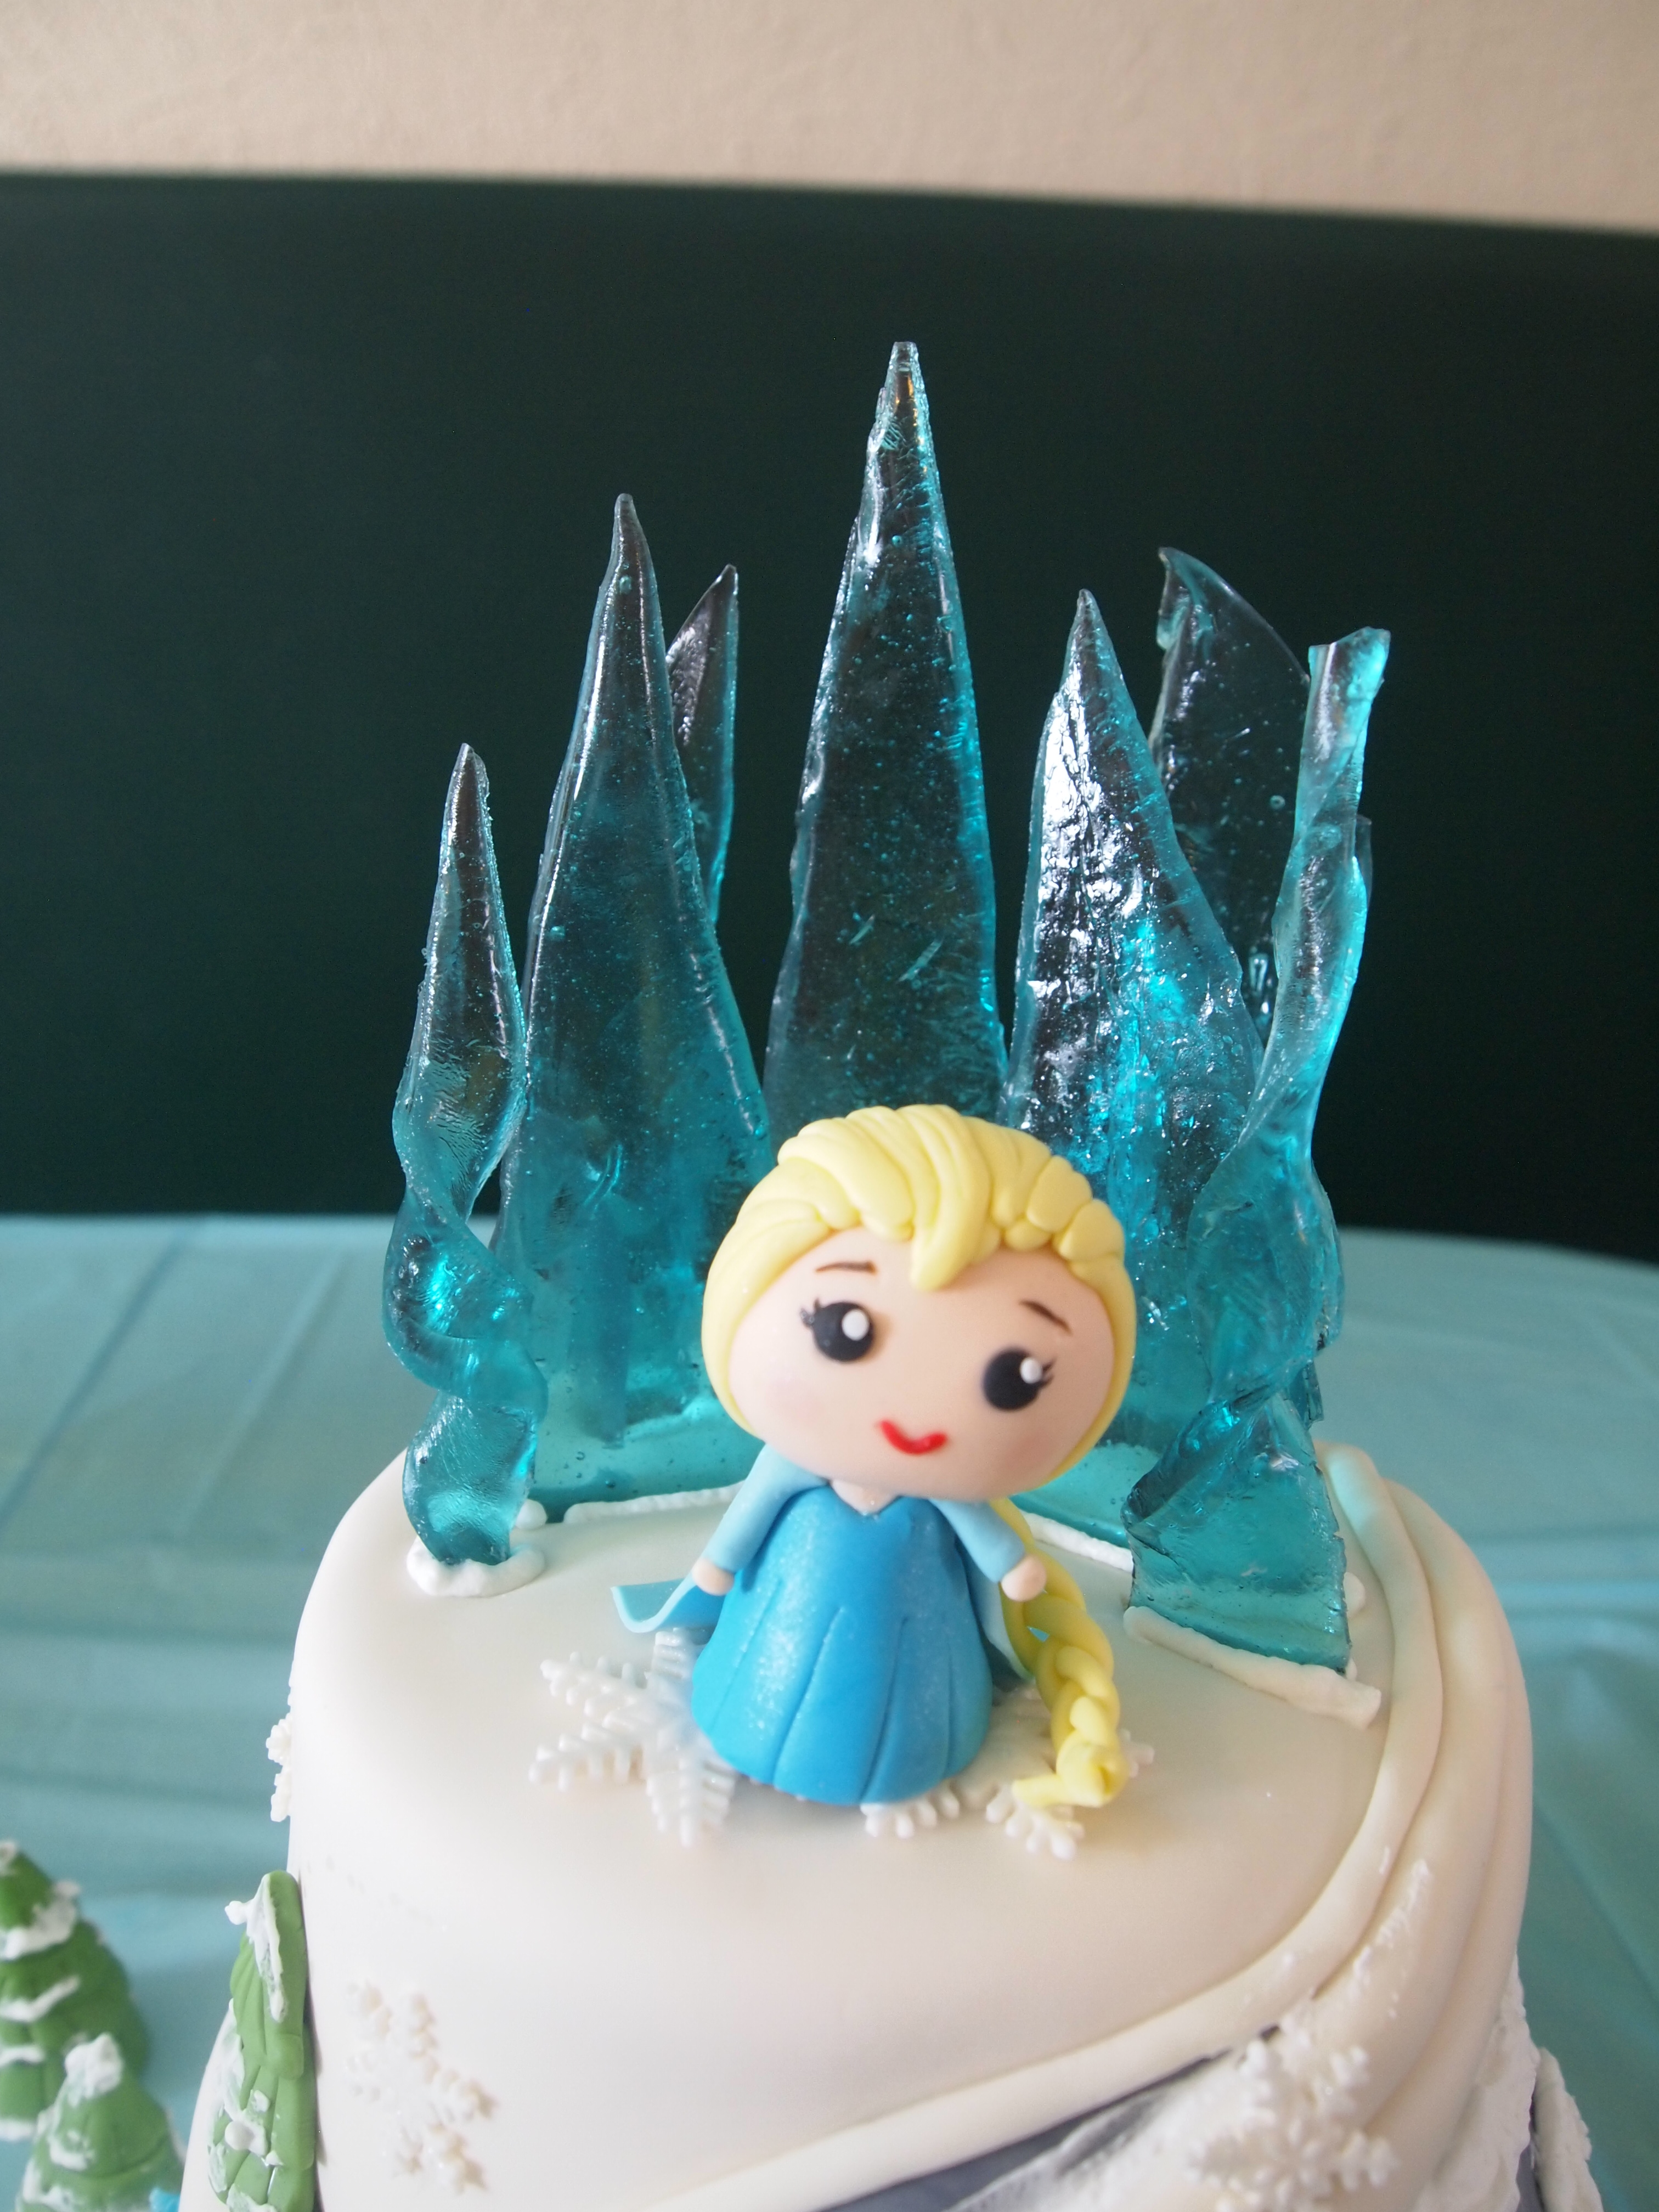 Elsa and Her Ice Castle